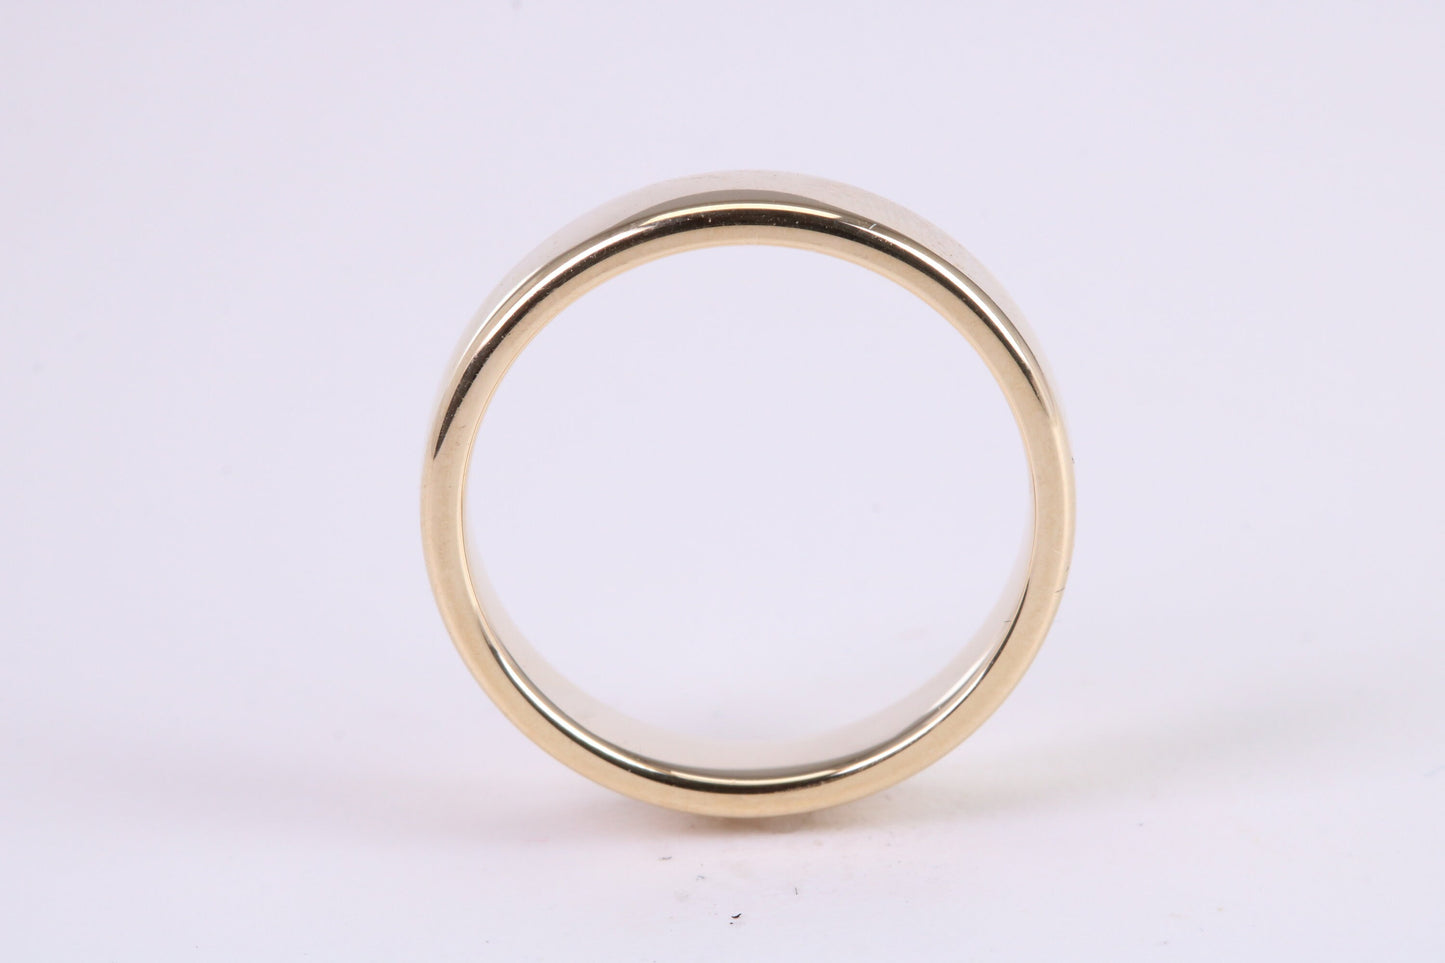 3 mm Wide Simple Comfort Court Profile Wedding Band, Made from Solid Yellow Gold, British Hallmarked